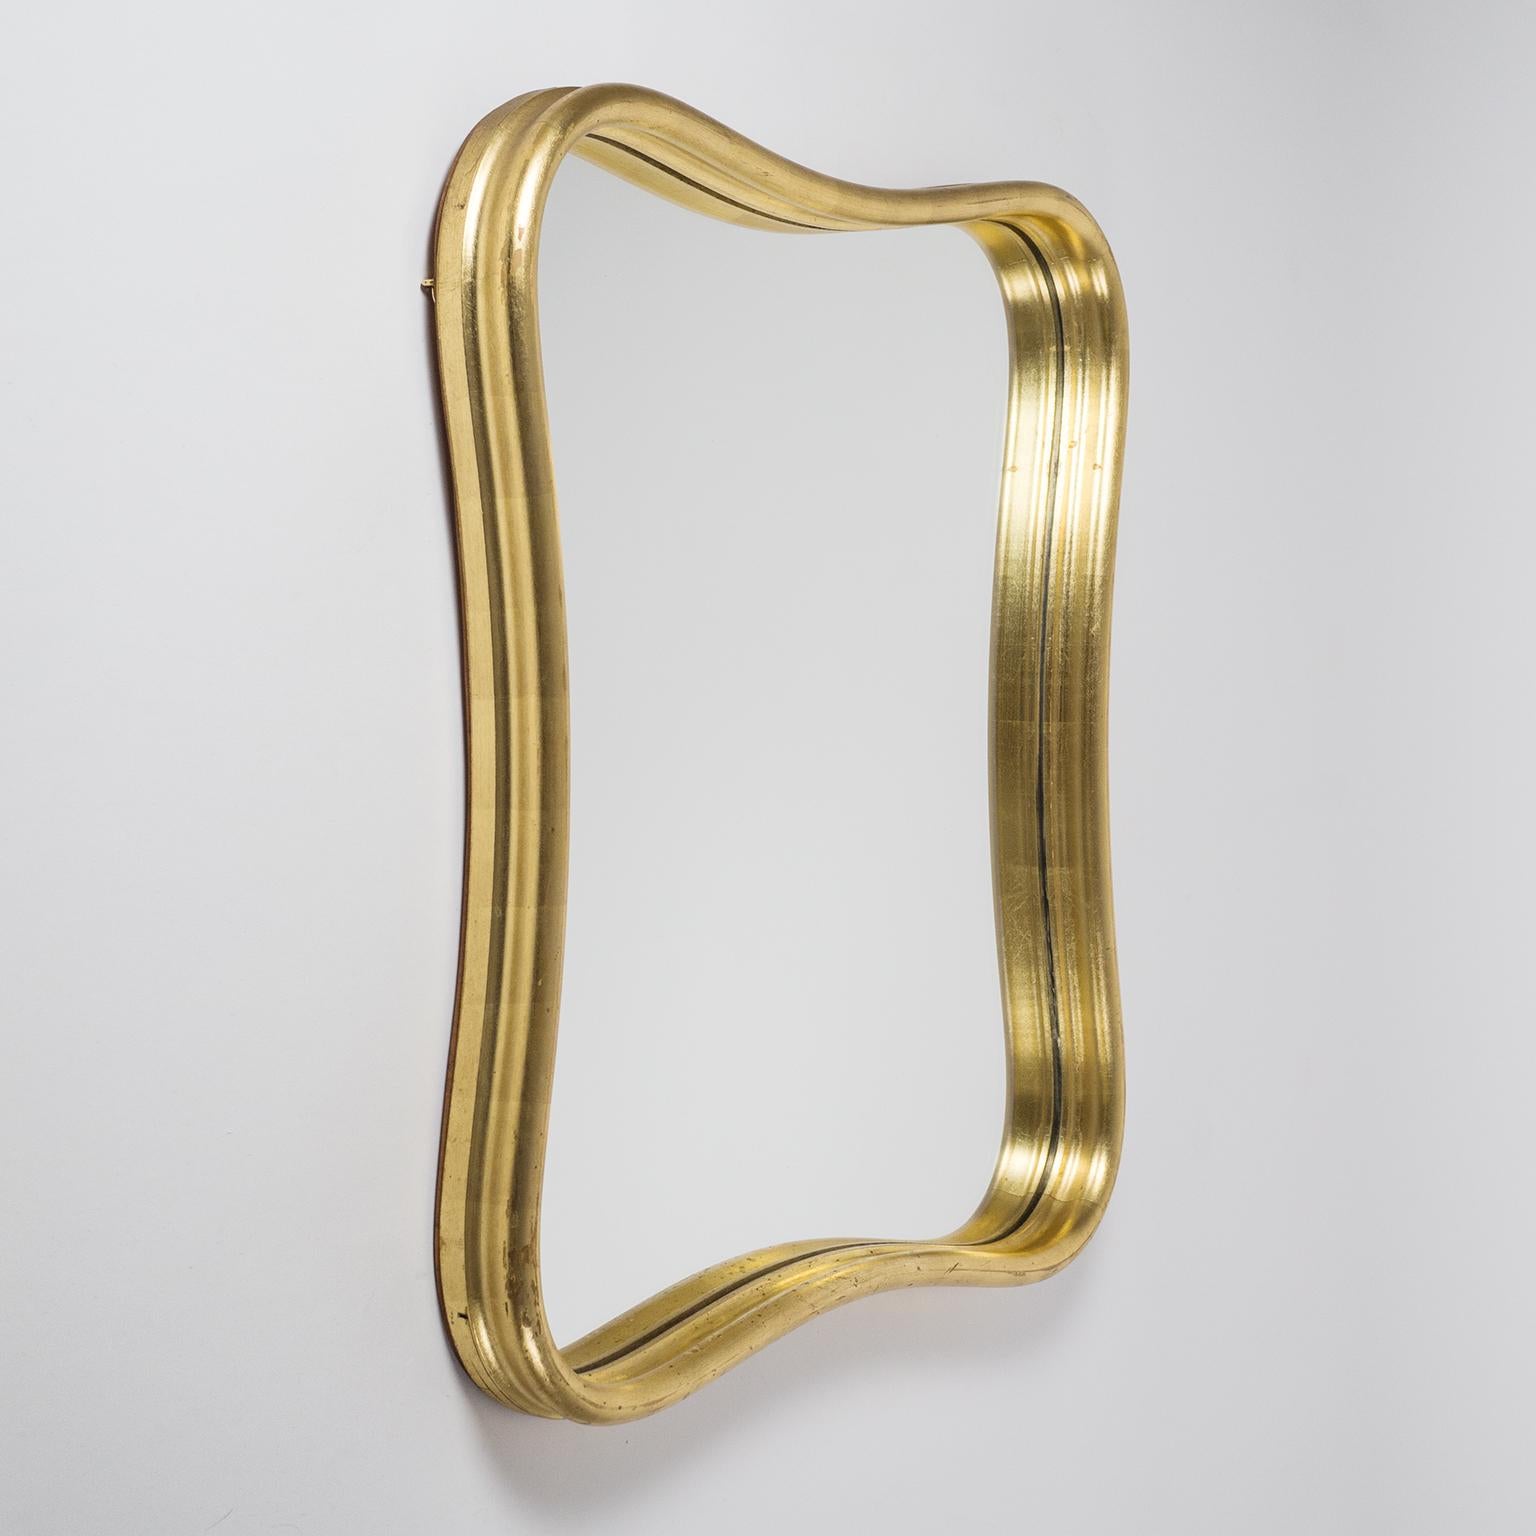 Lovely Austrian giltwood mirror from the 1940s. Sensuously curved frame with a rounded profile and gold leaf finish. Fine original condition with some light wear to the gold leaf.